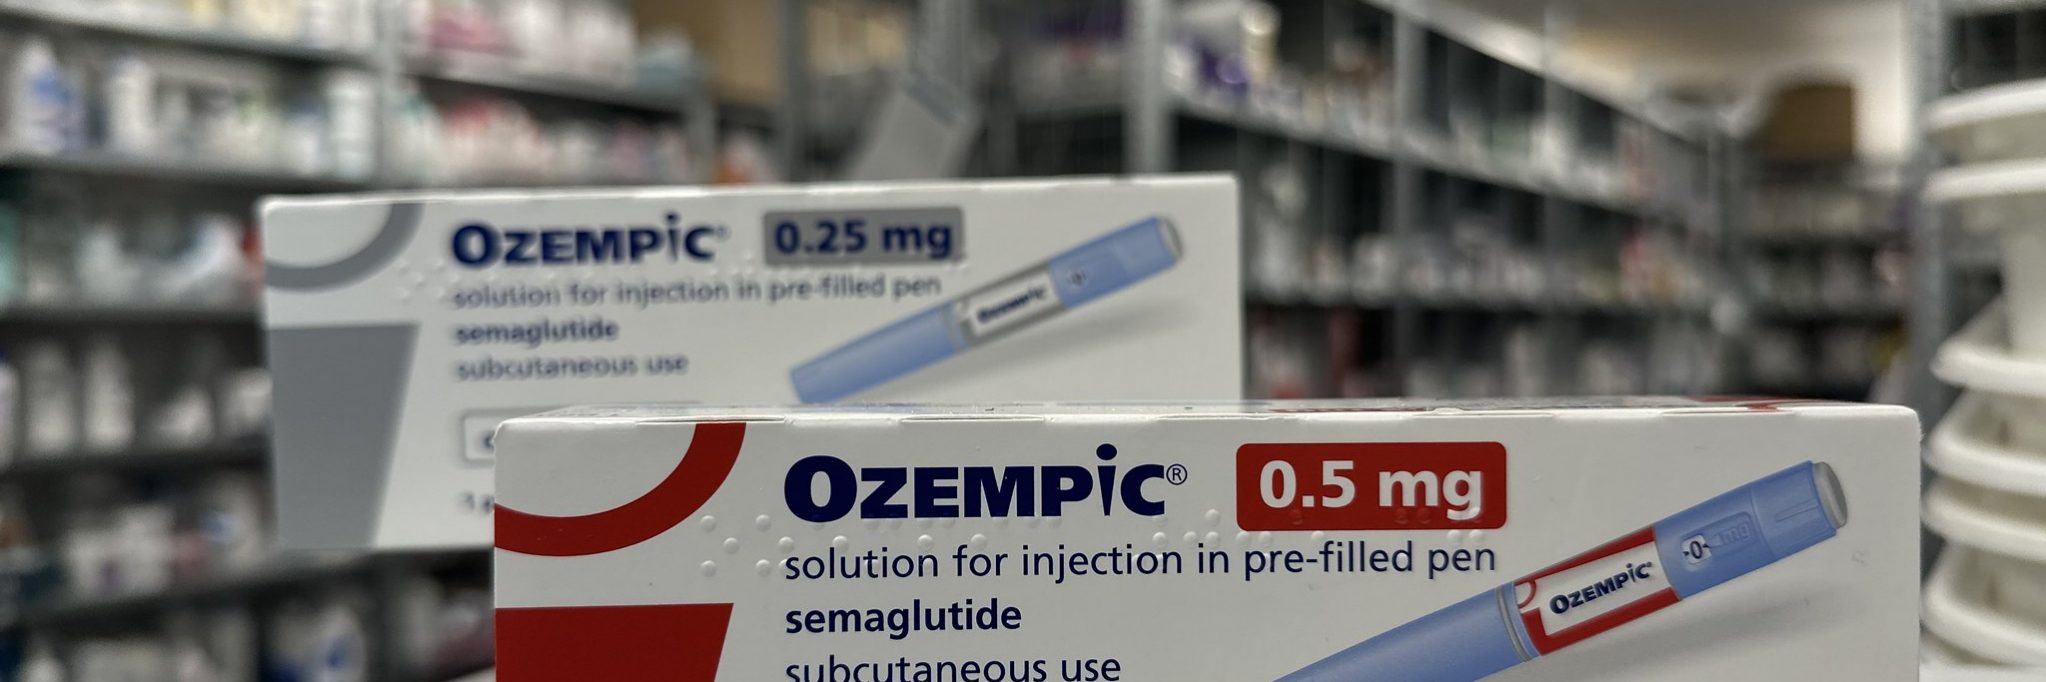 Ozempic drugs